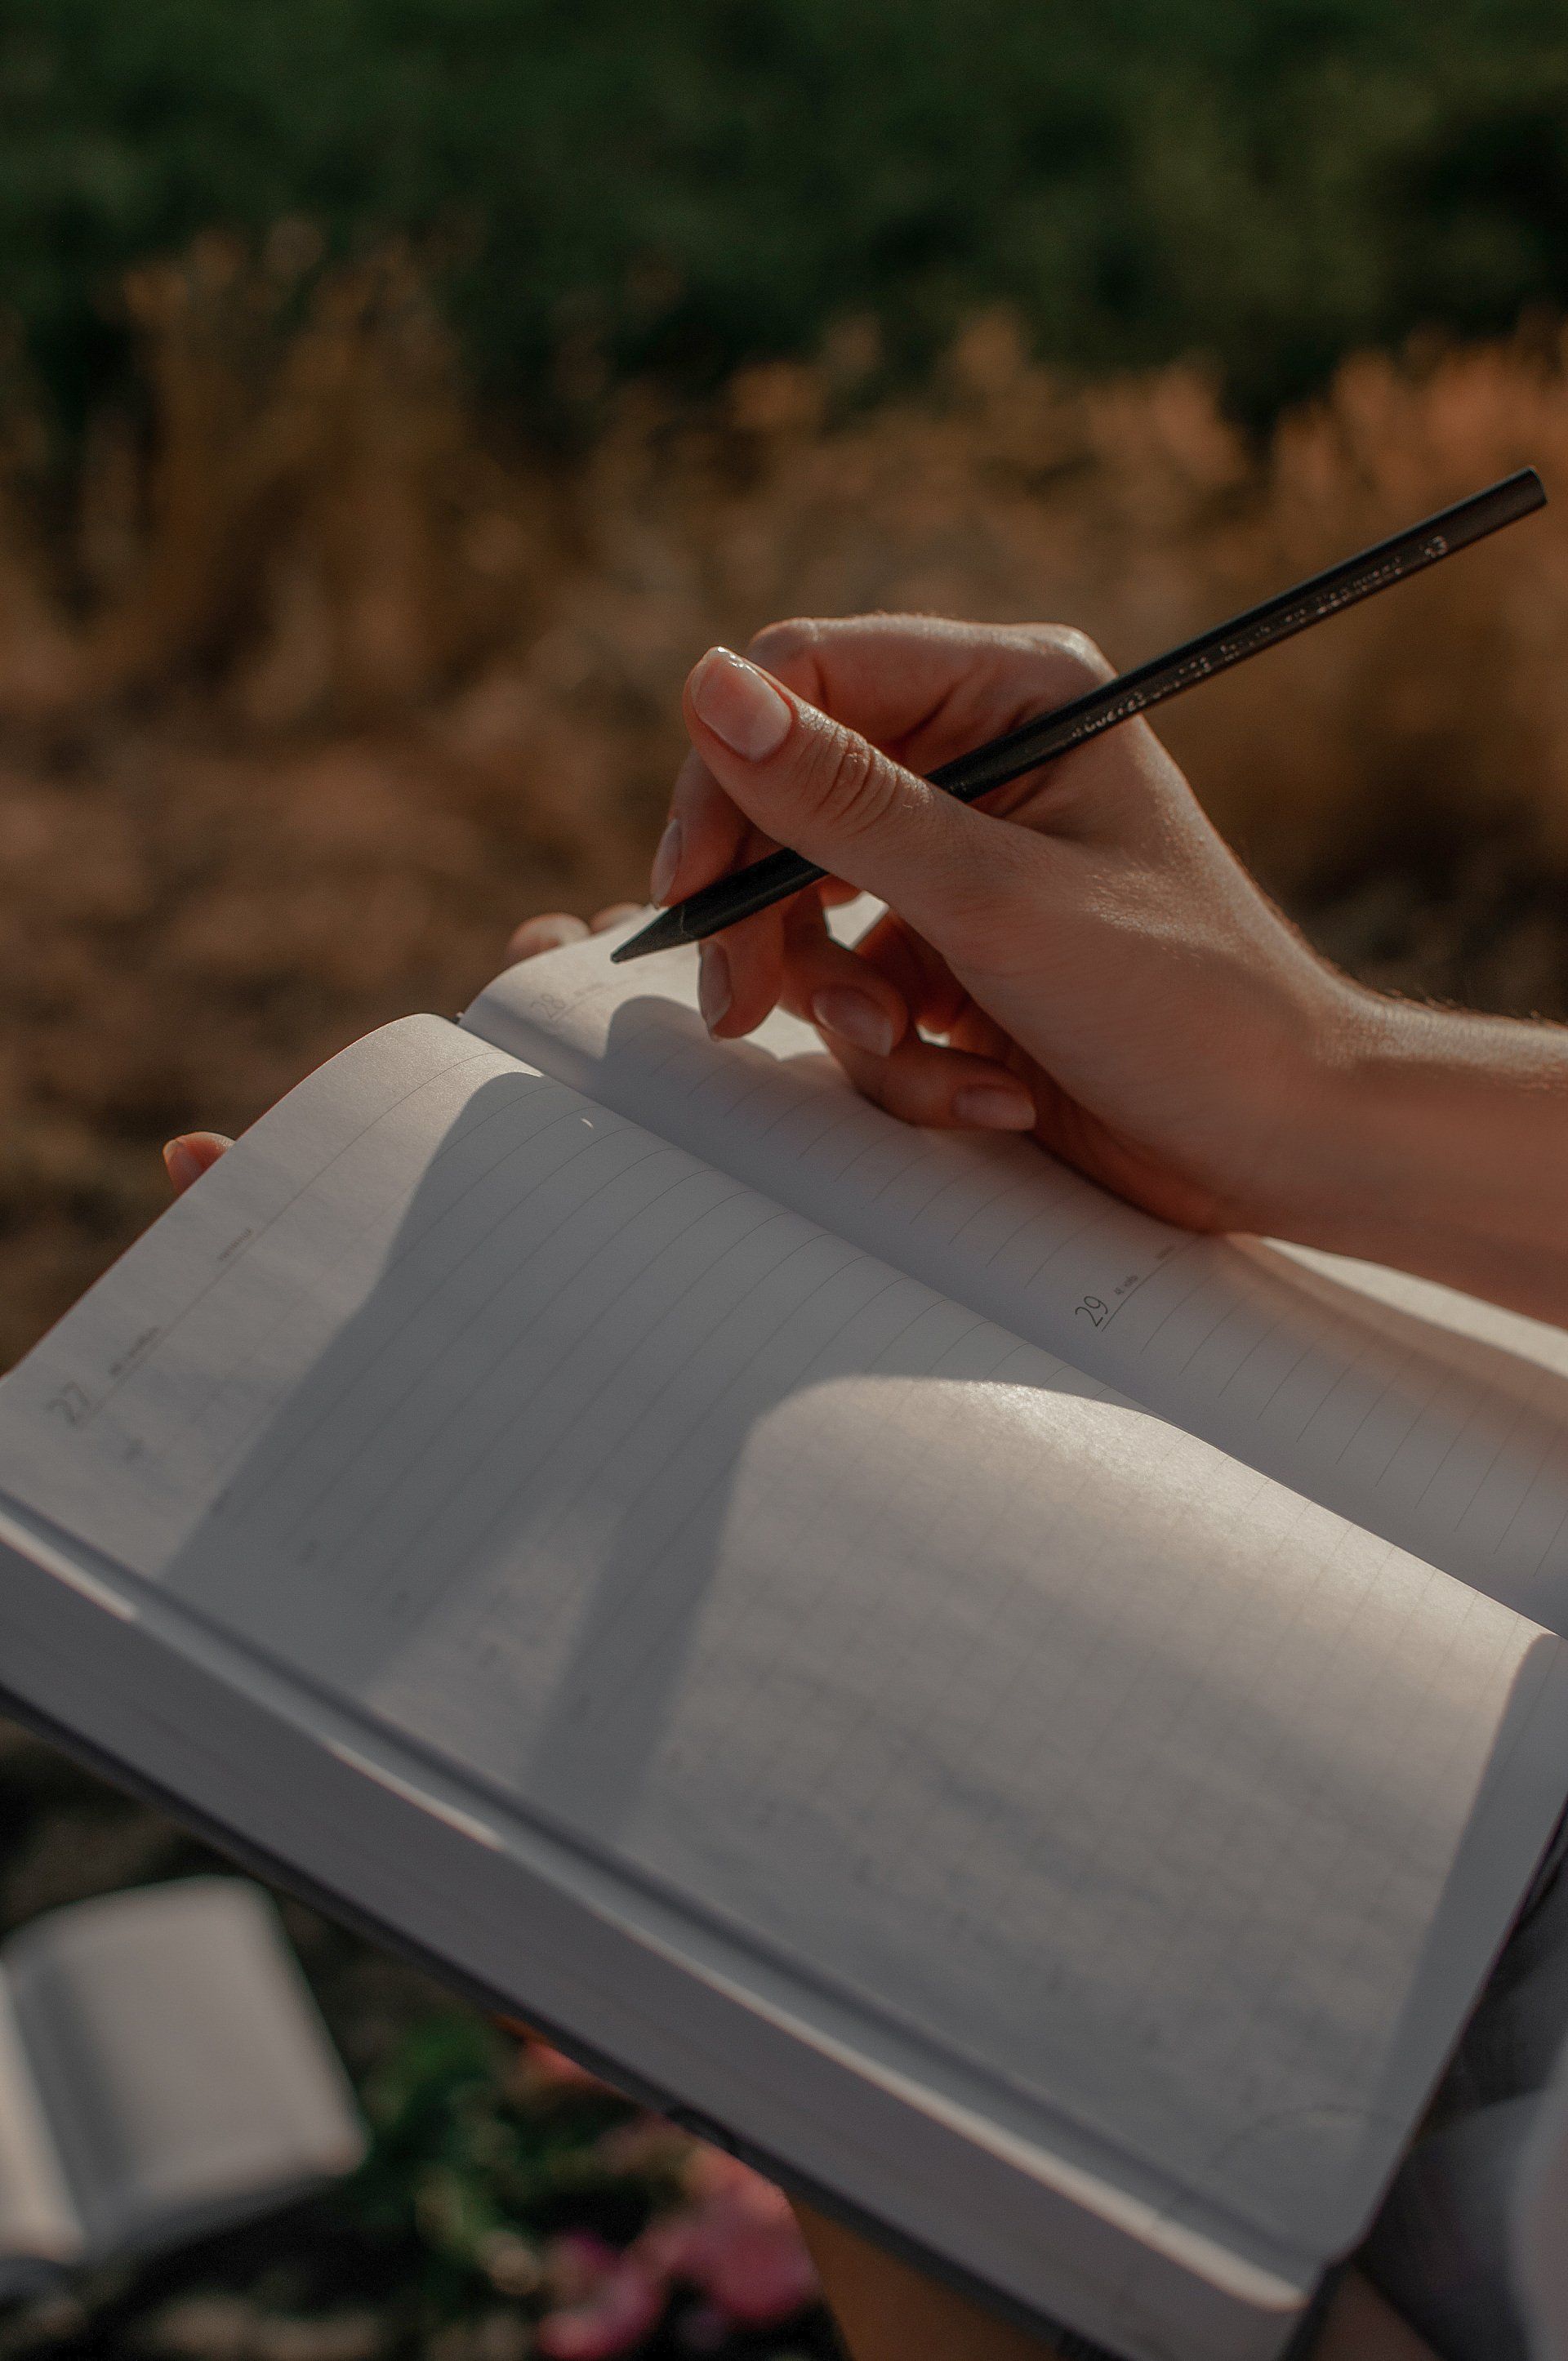 Image of someone hand writing in a journal.